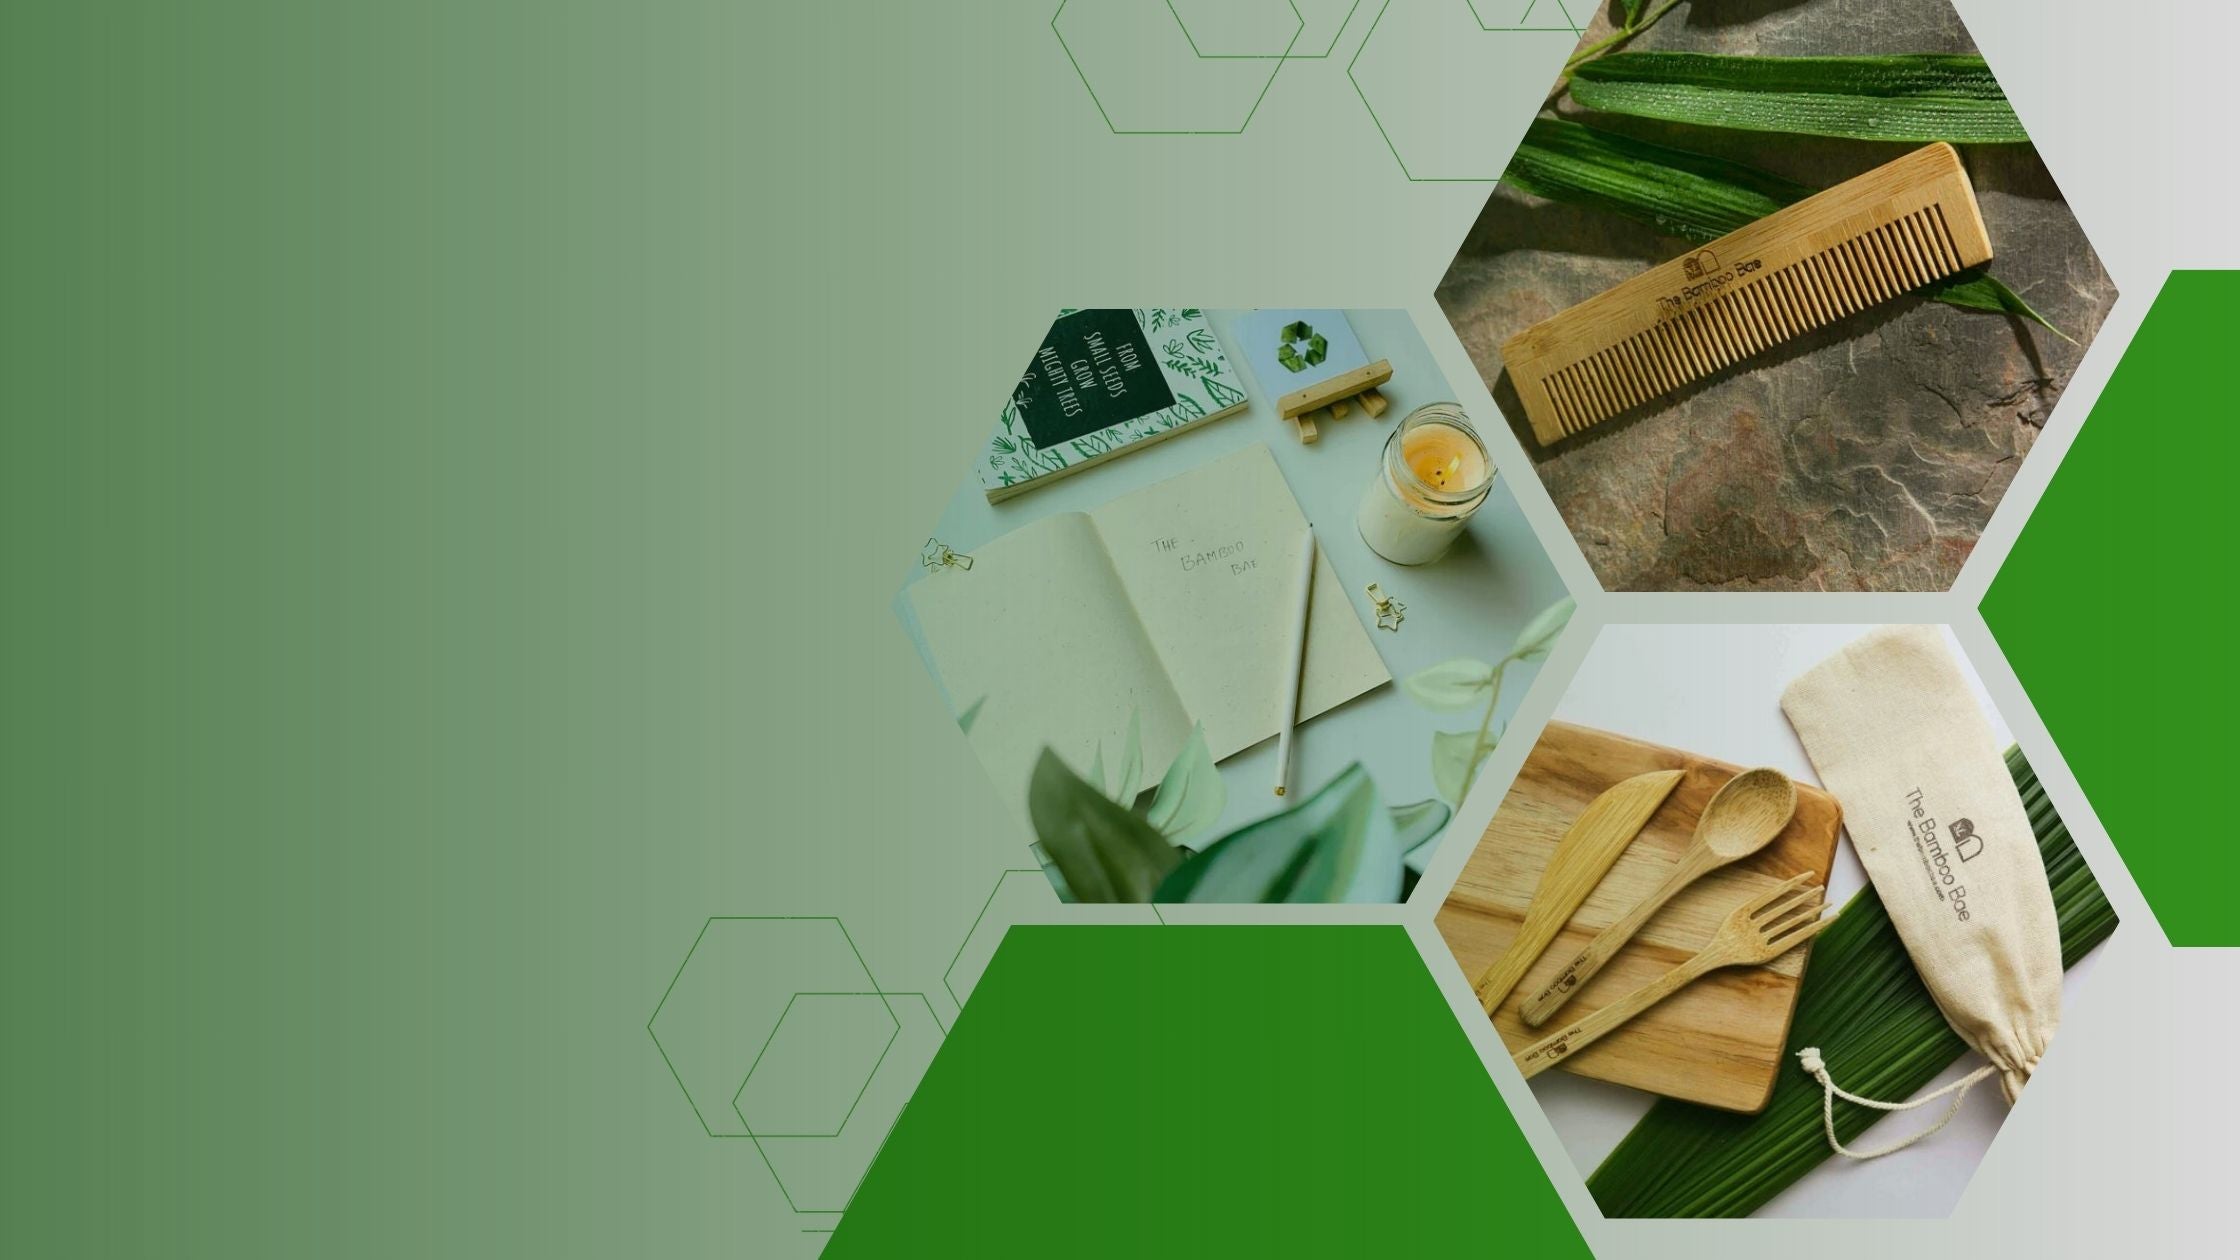 Bamboo vs. Plastic: Why Bamboo Products Are a Better Choice for the Environment